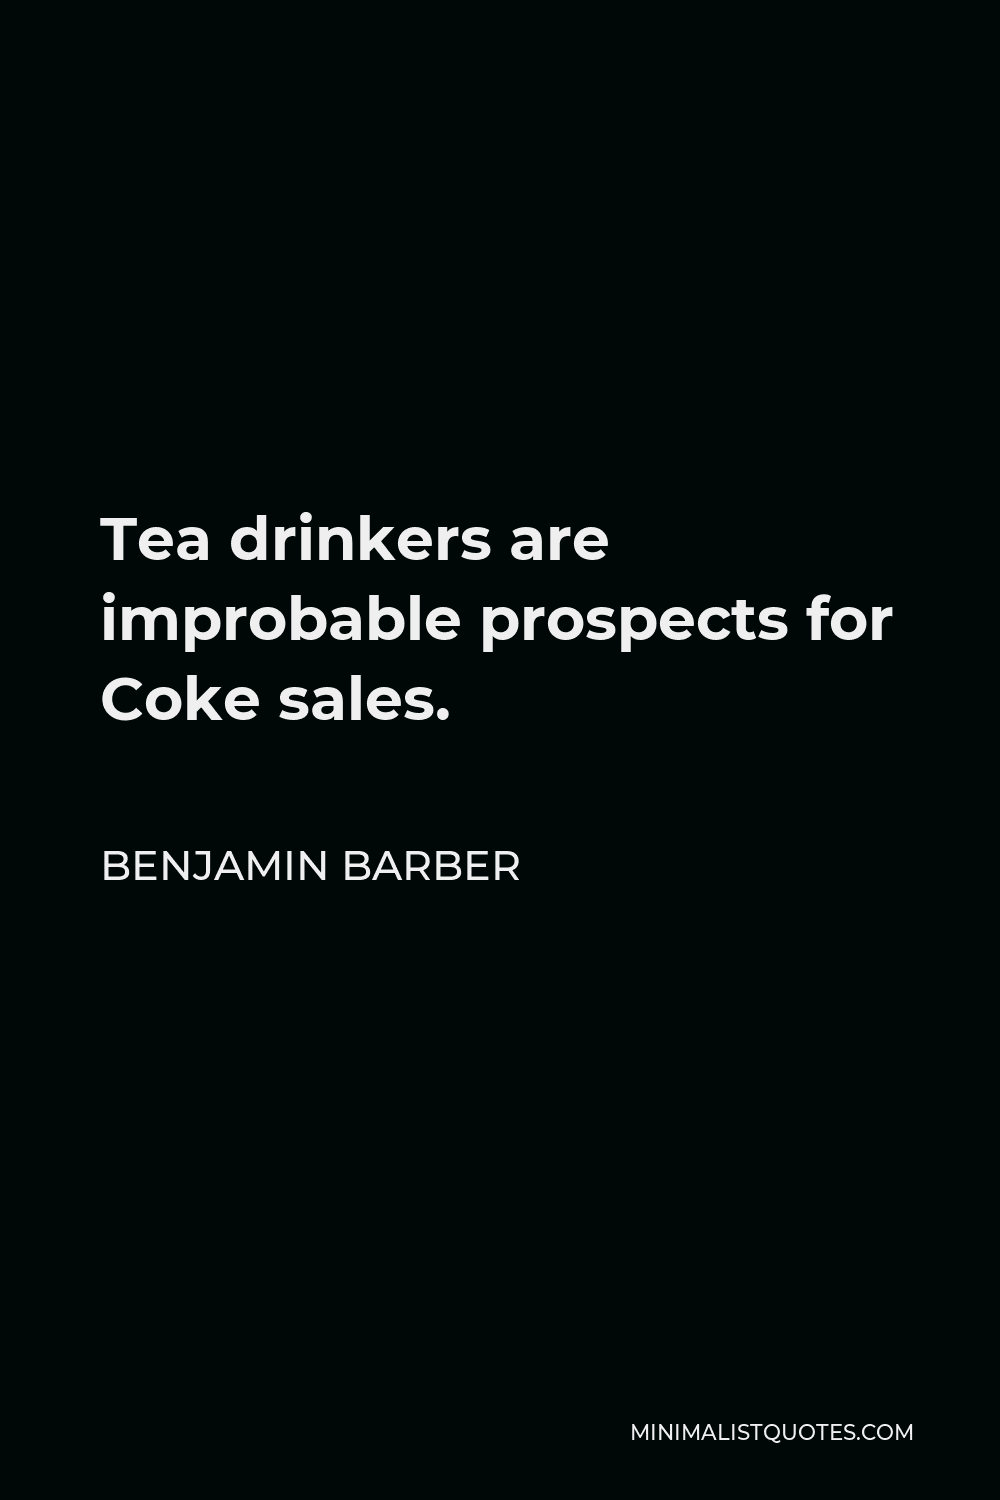 Benjamin Barber Quote - Tea drinkers are improbable prospects for Coke sales.